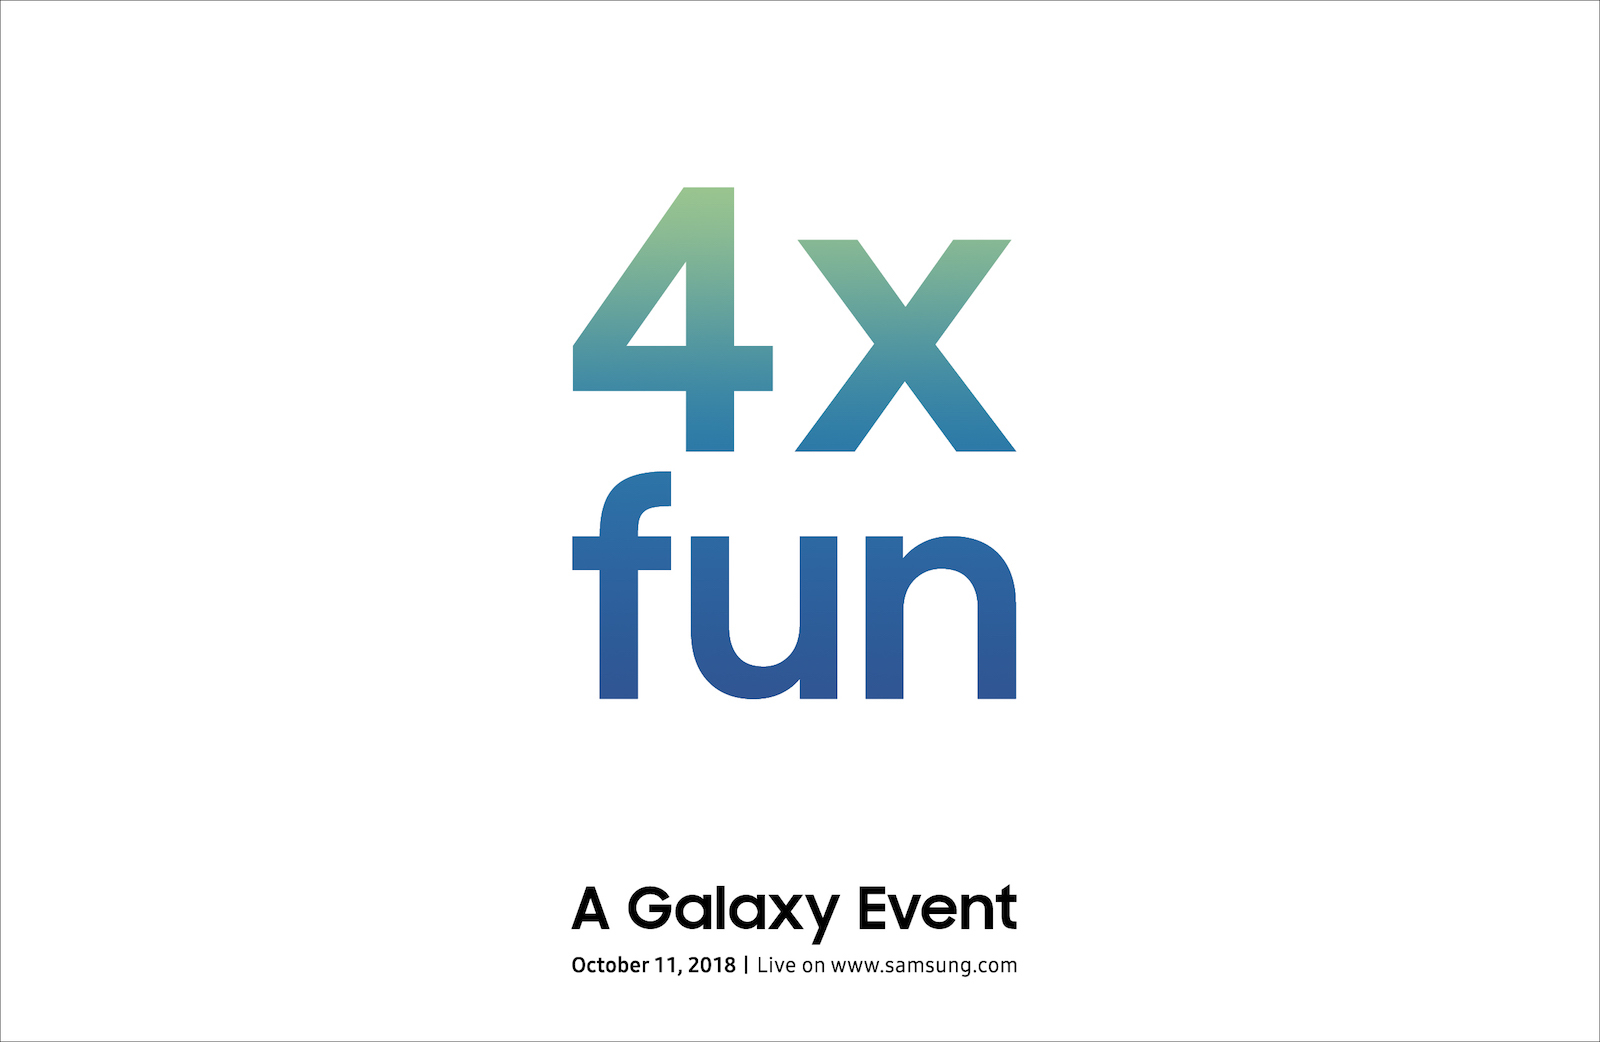 Samsung to host '4x Fun' launch event on October 11